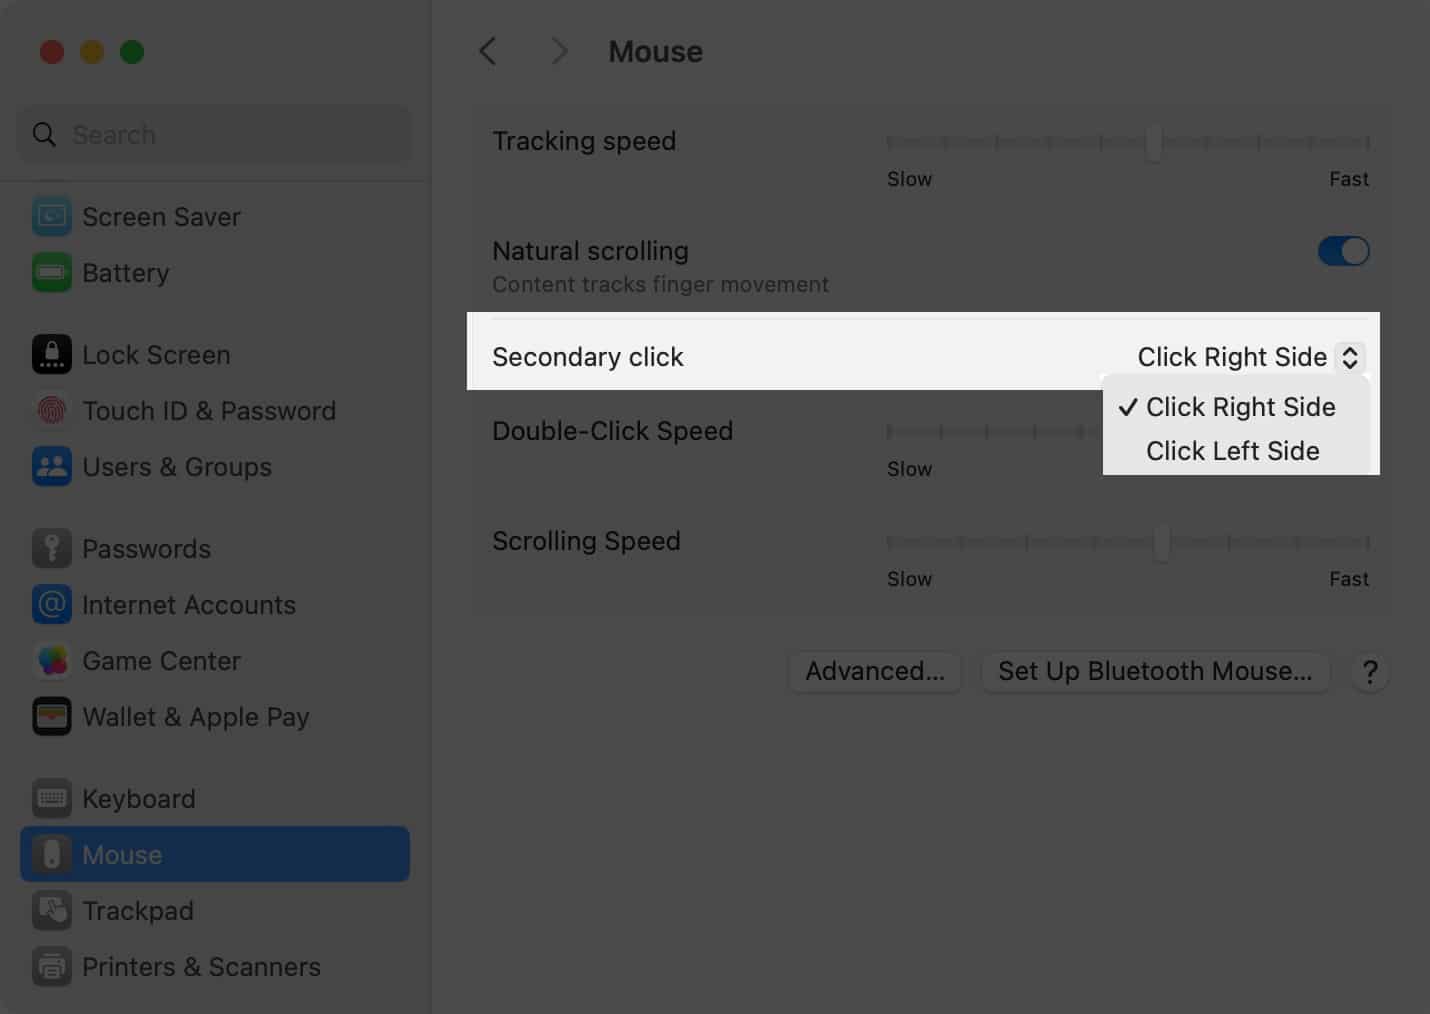 Secondary click settings for Regular mouse